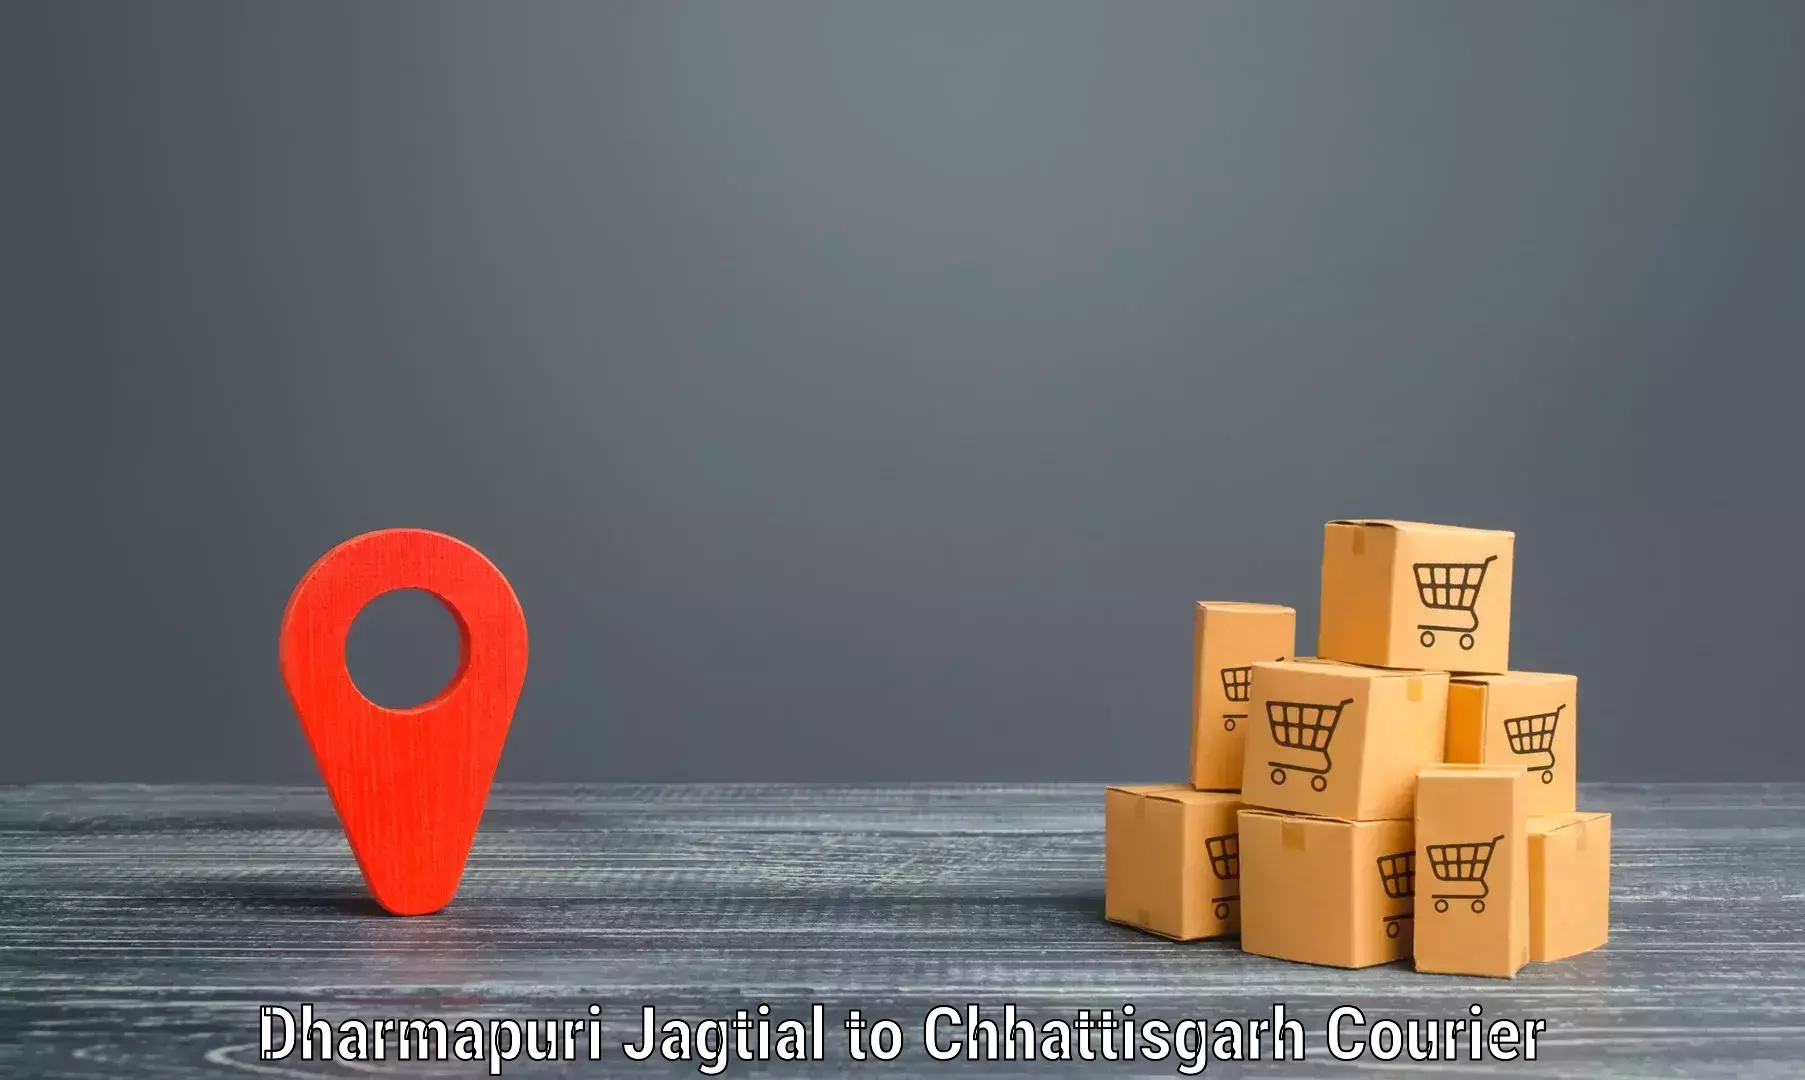 Nationwide shipping services Dharmapuri Jagtial to Dongargarh